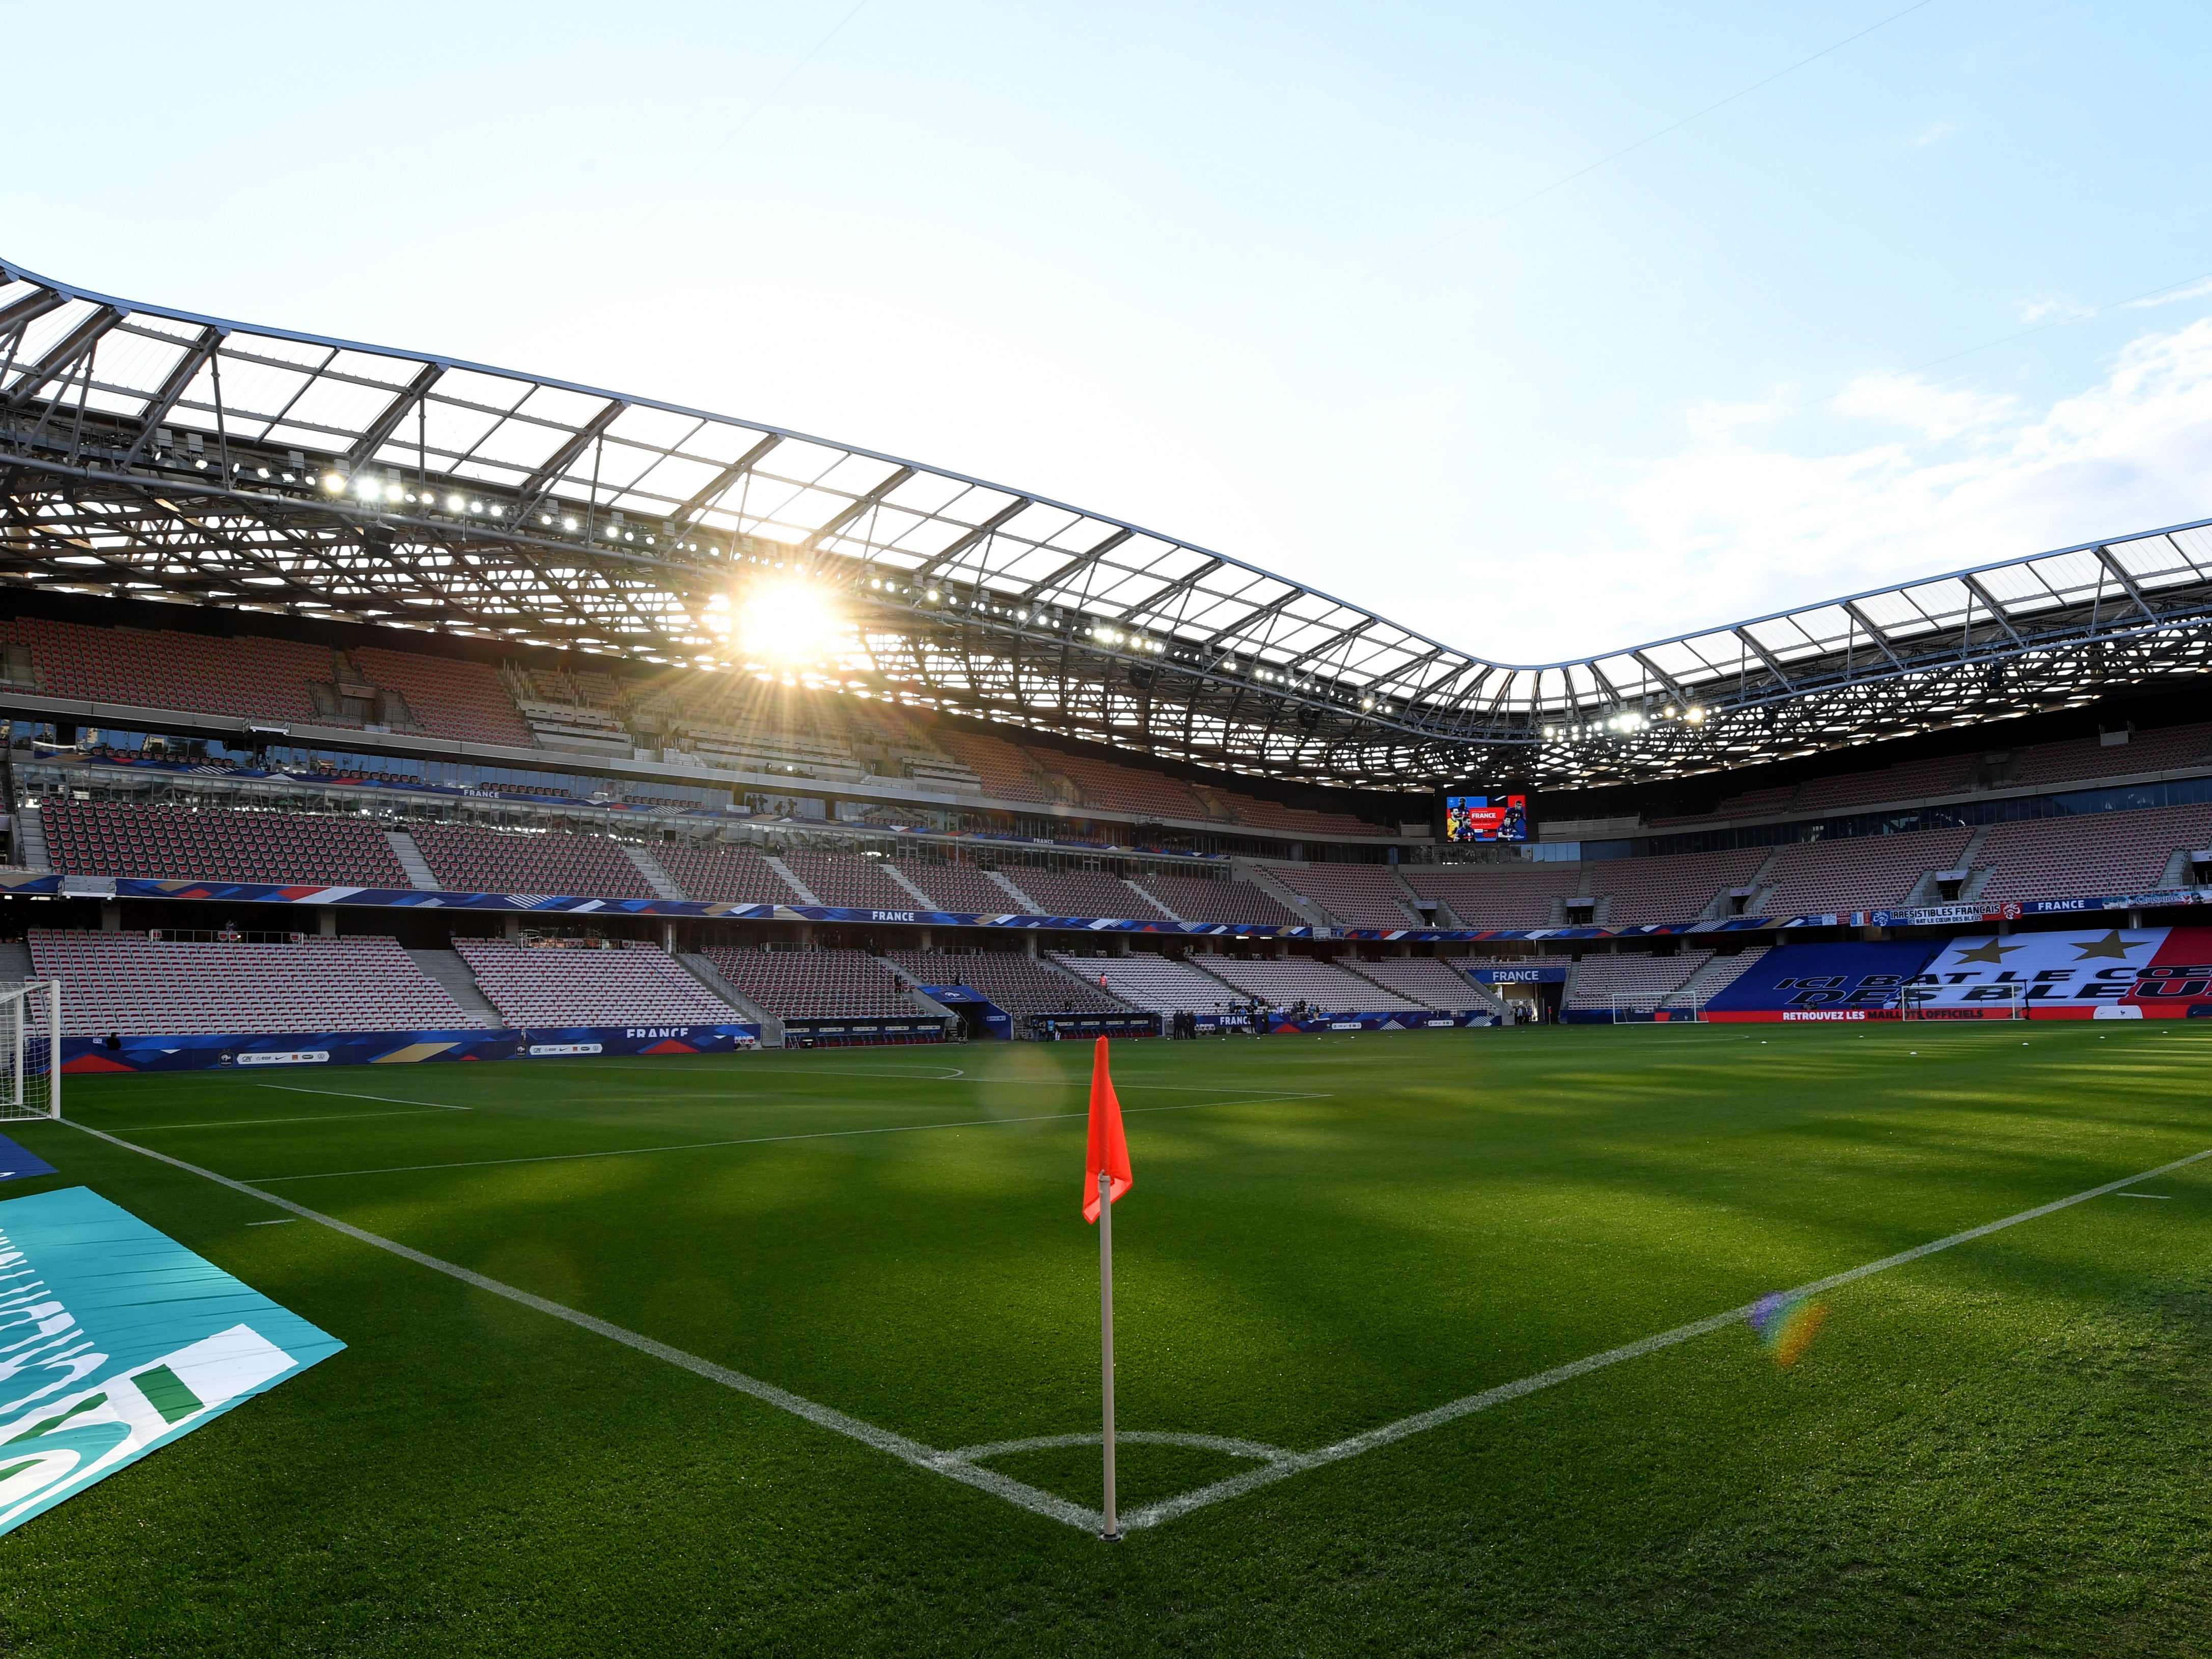 A general view of the Allianz Riviera